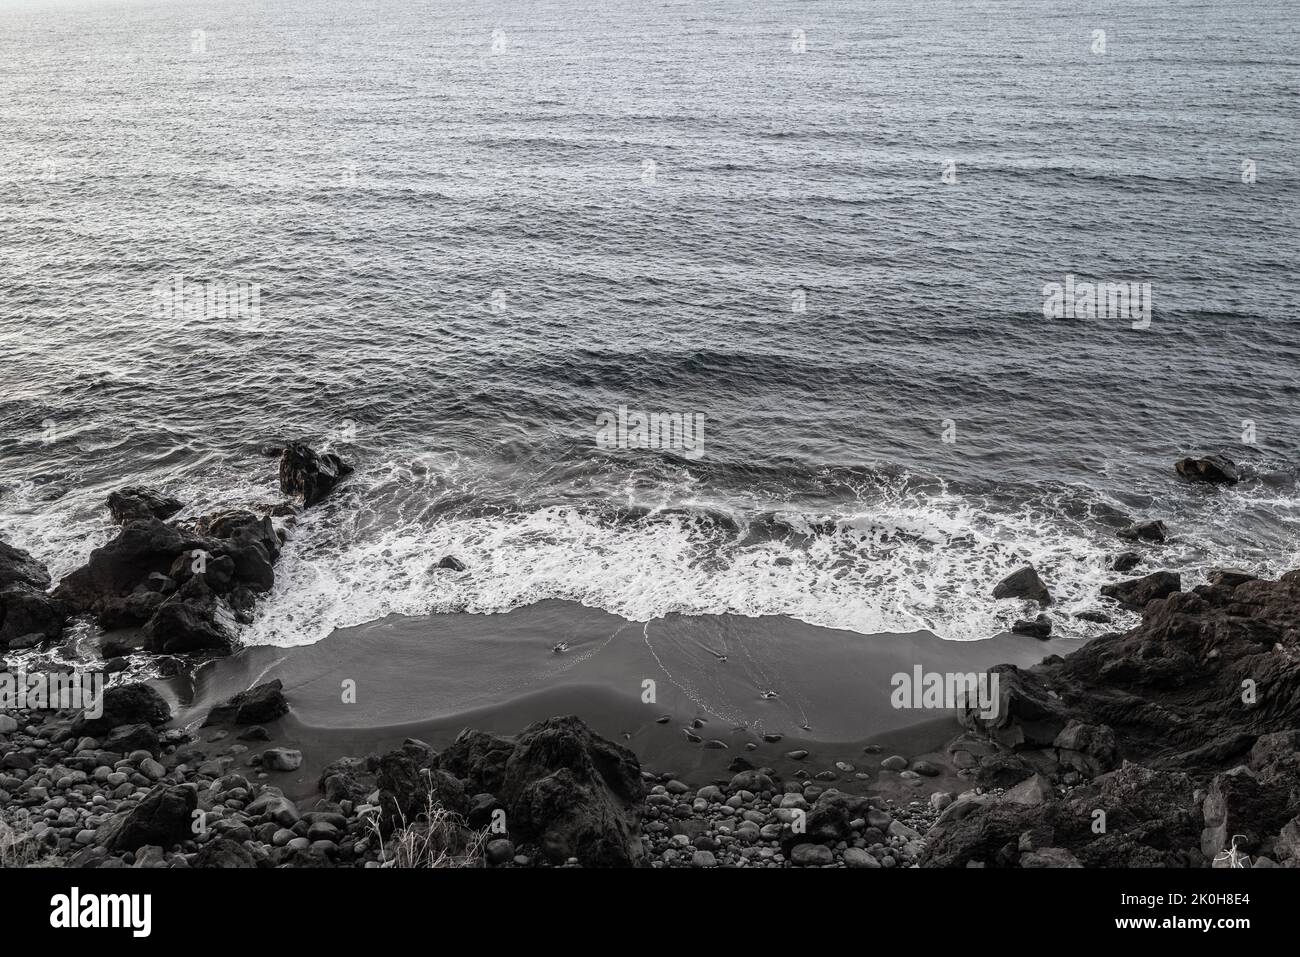 Black sand beach aerial view. Grey and black volcanic rocks and ocean waves Stock Photo